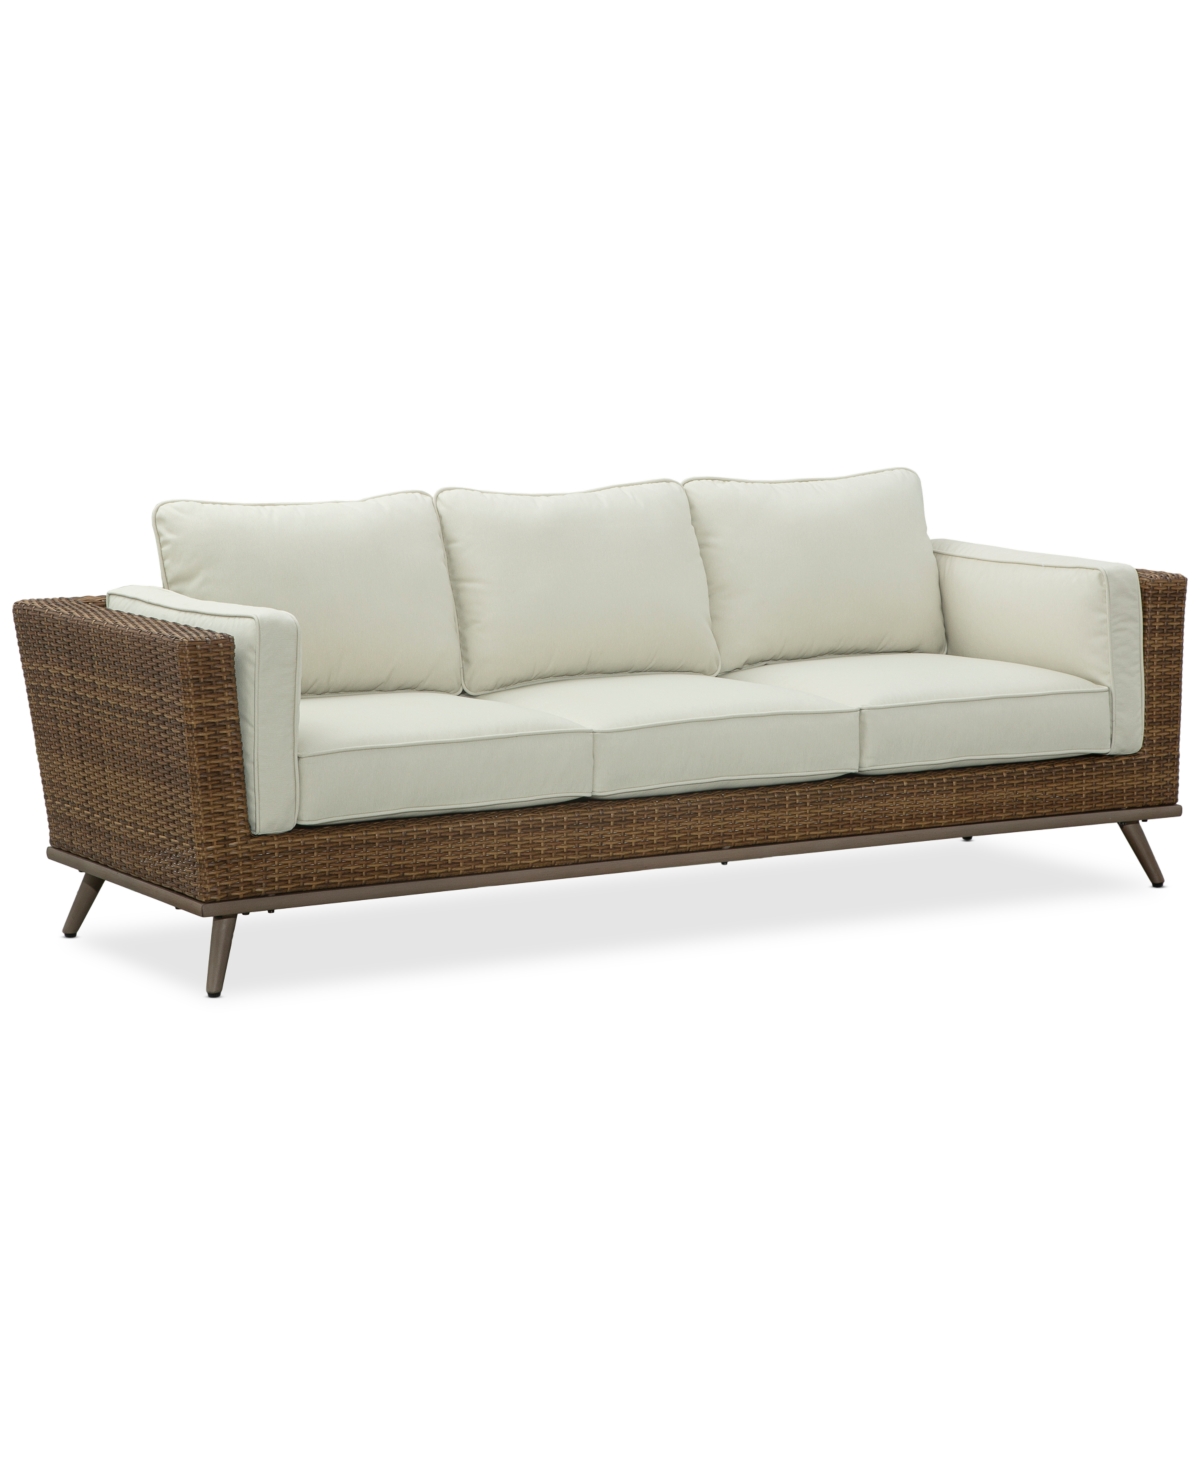 Drew & Jonathan Home Skyview Outdoor Sofa In Driftwood